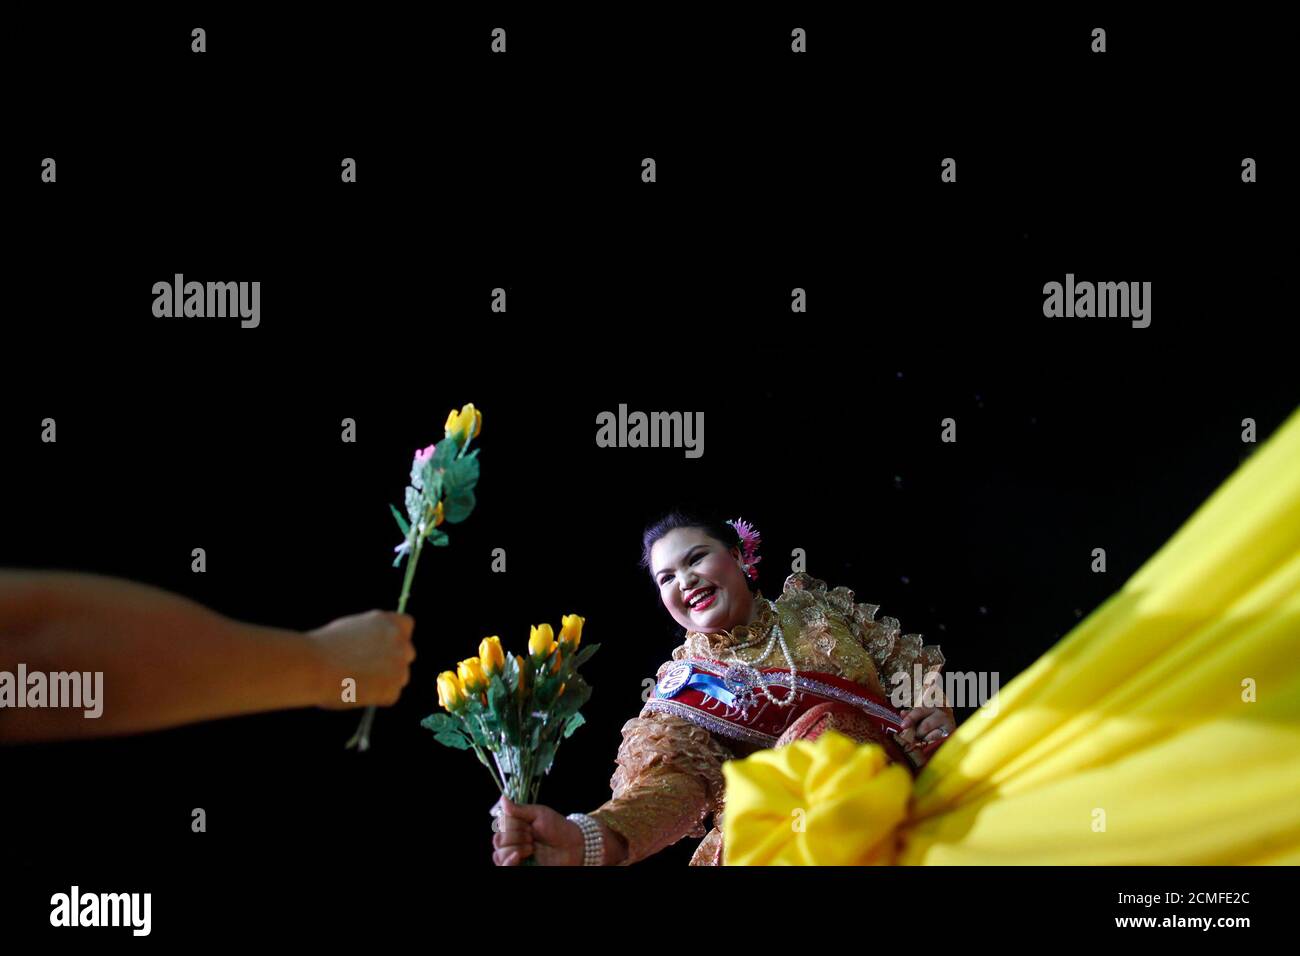 A participant in the Jumbo Queen beauty contest receives flowers while on the stage in Ayutthaya late December 19, 2009. More than 30 Thai ladies took part in the Jumbo Queen beauty contest for women over 80 kg in the world heritage site of Ayutthaya.  REUTERS/Damir Sagolj (THAILAND - Tags: SOCIETY IMAGES OF THE DAY) Stock Photo